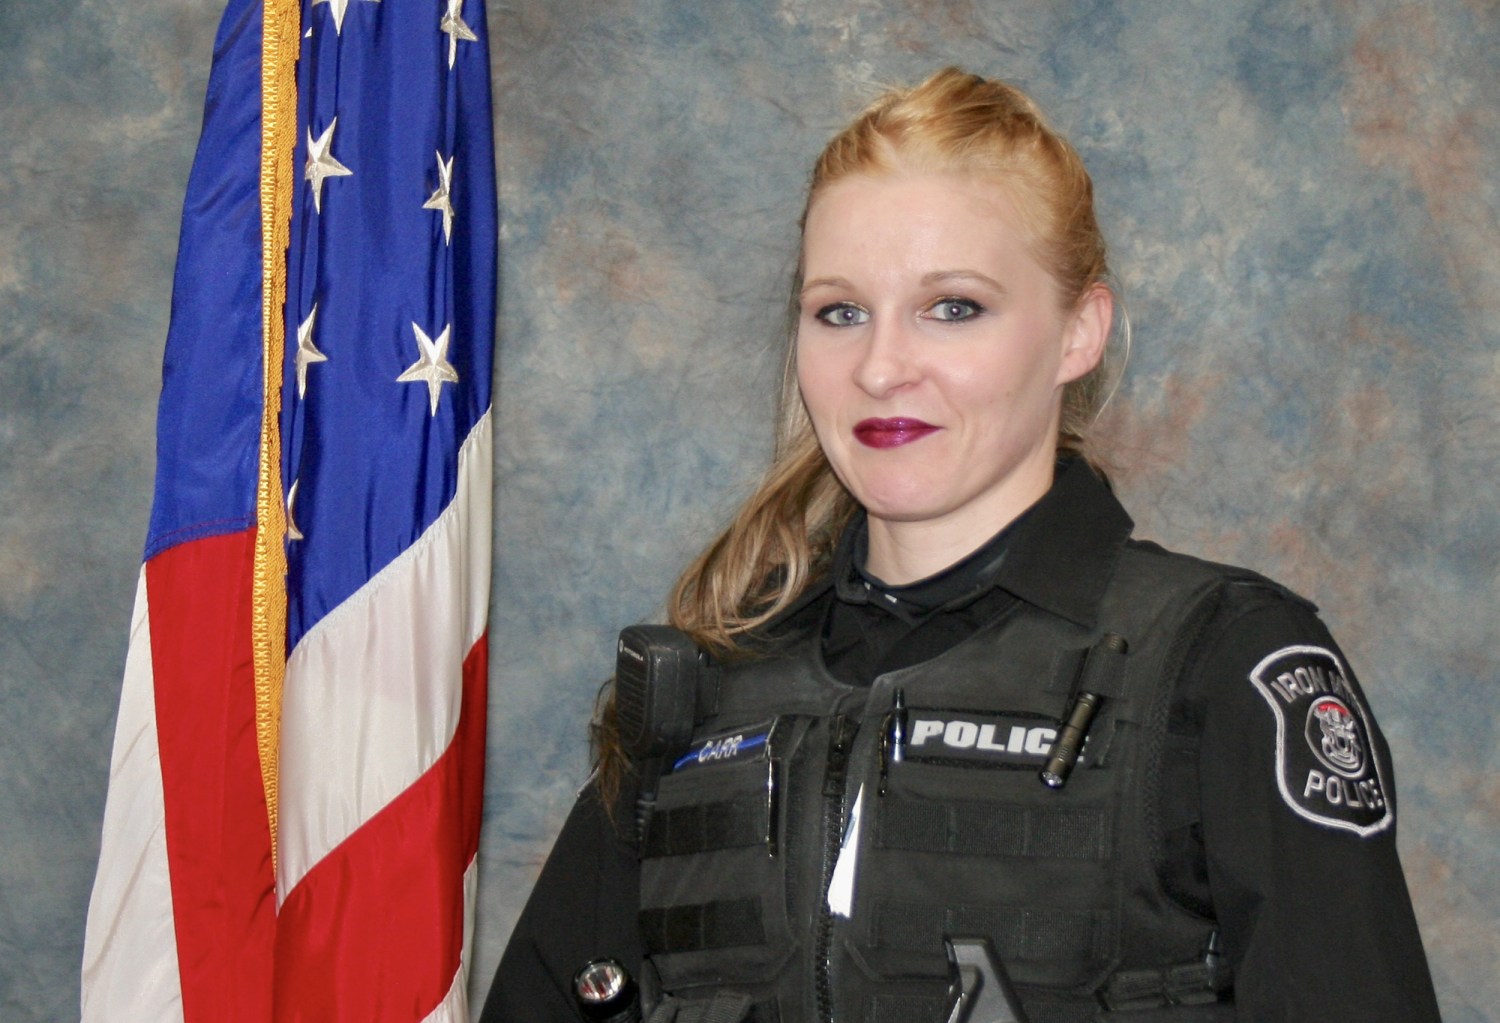 Michigan departments first female cop alleges relentless harassment image pic